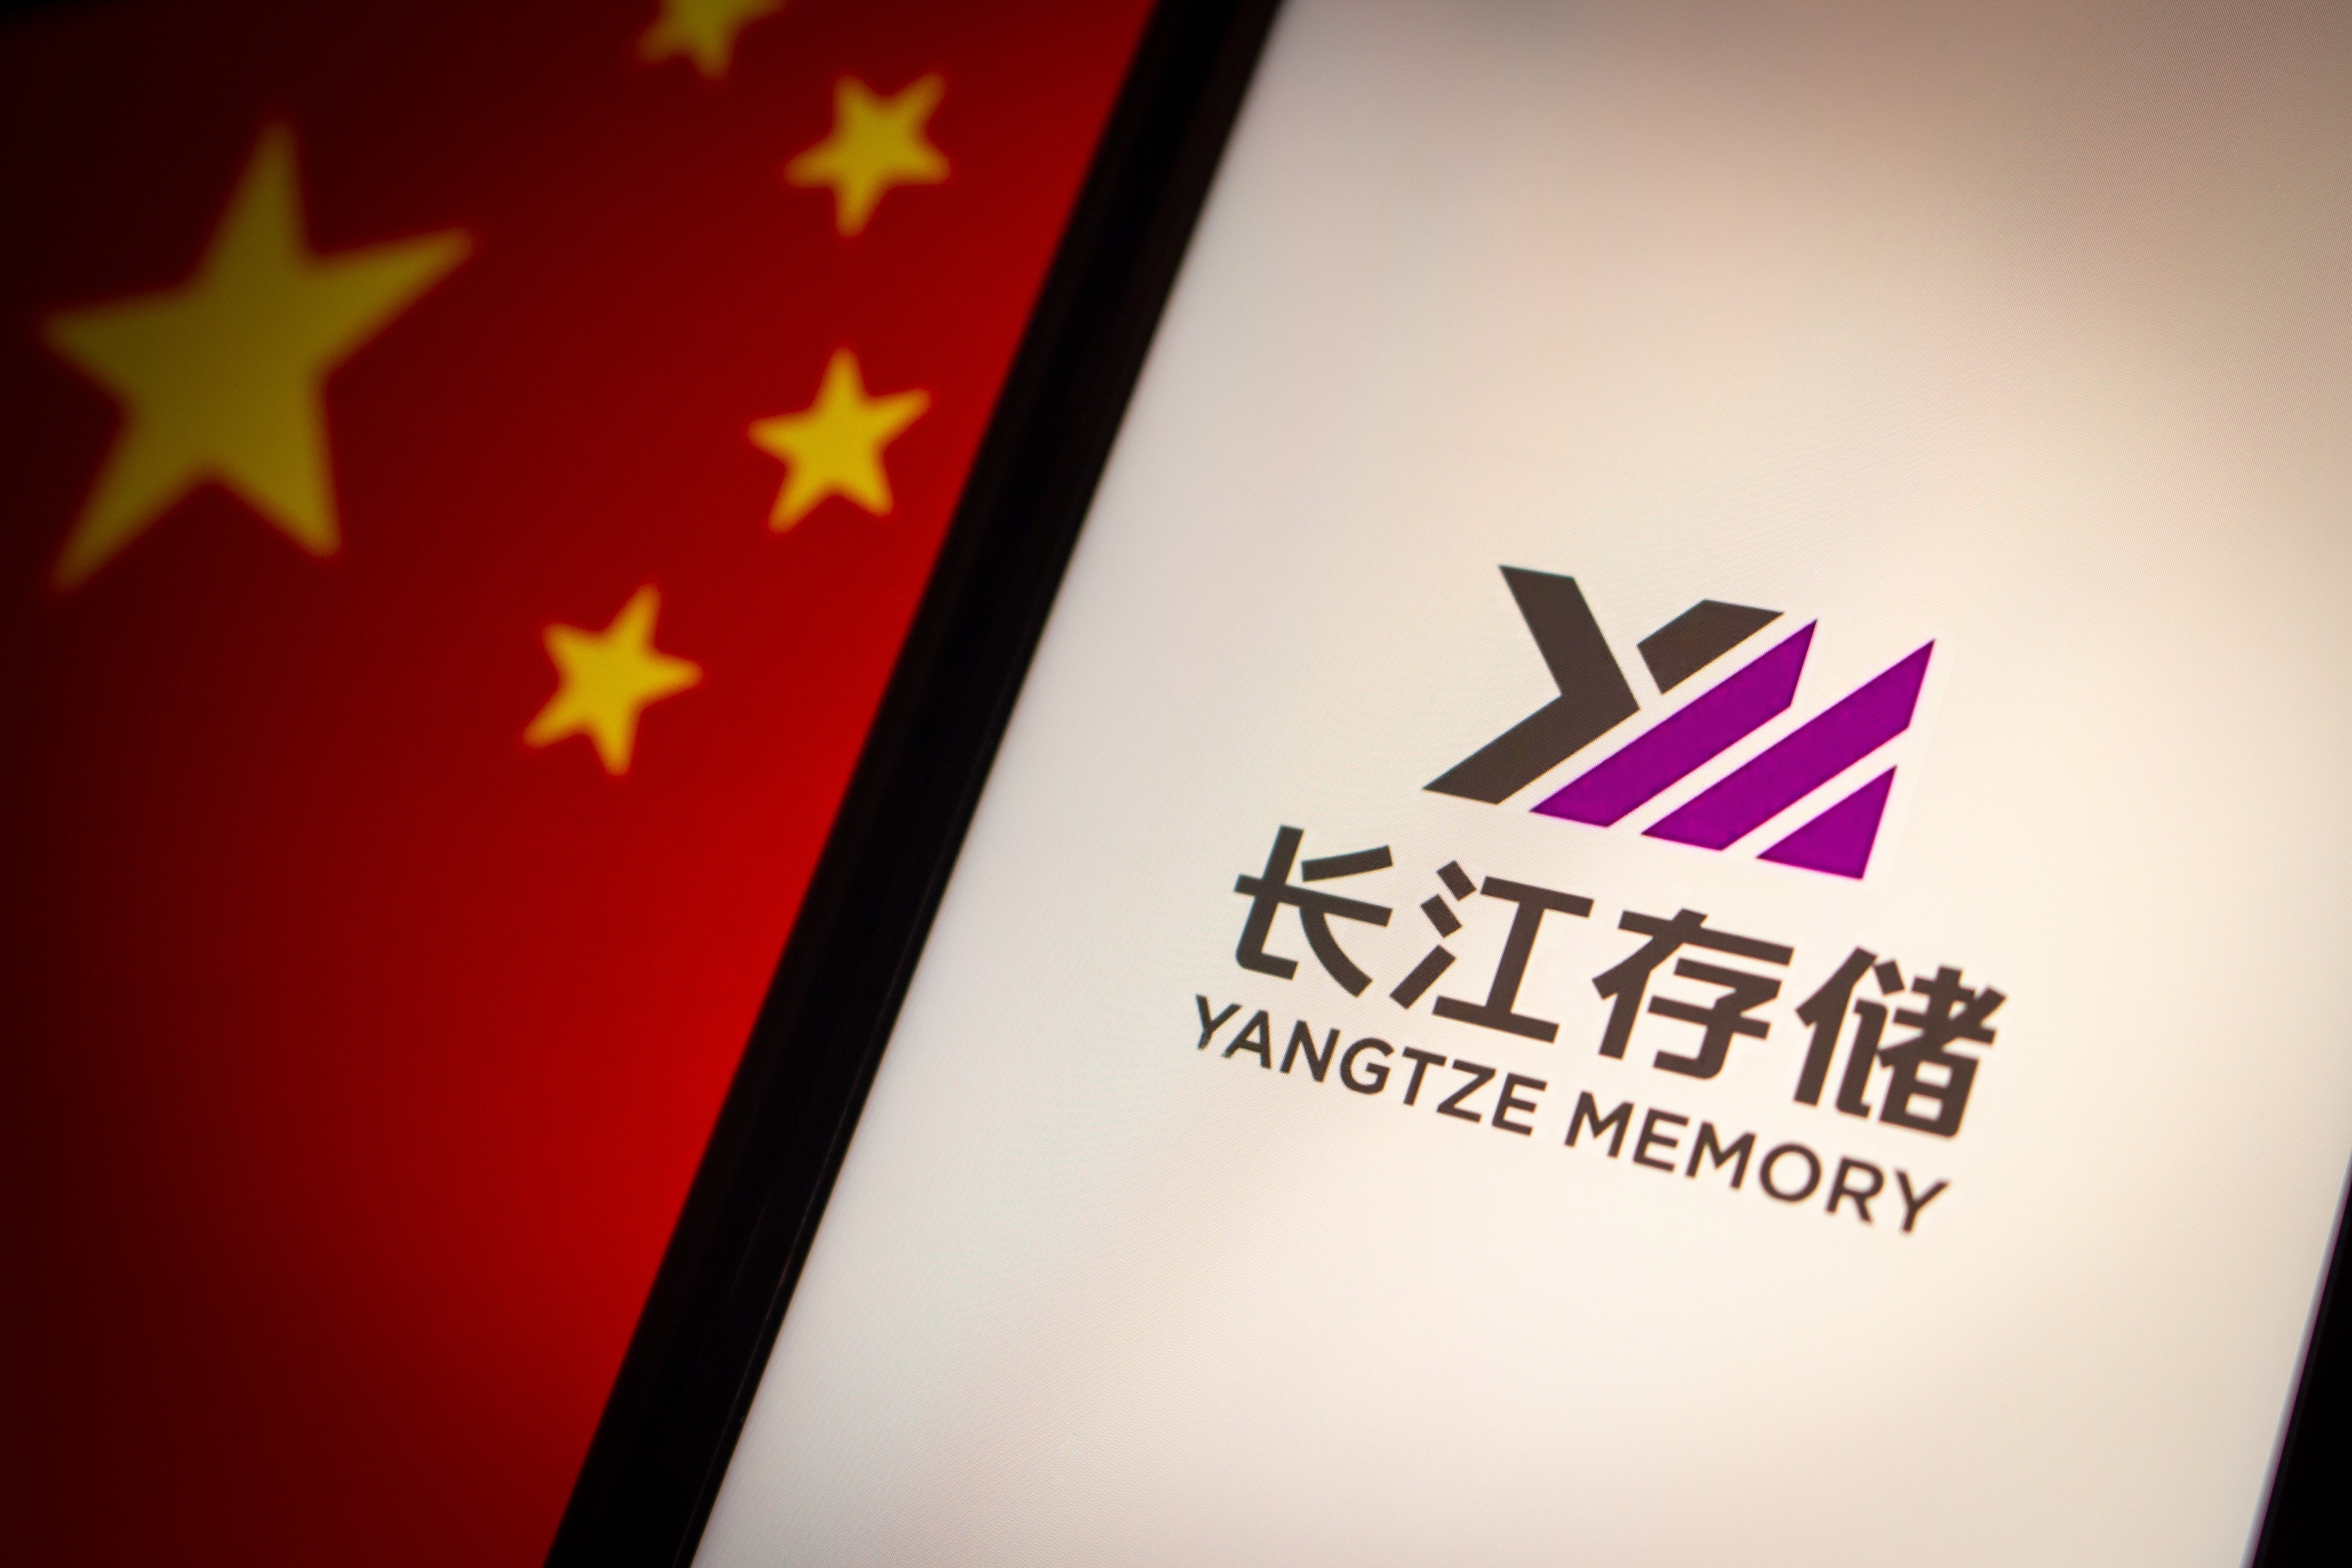 YMTC is China’s top memory chip maker. Photo: Shutterstock